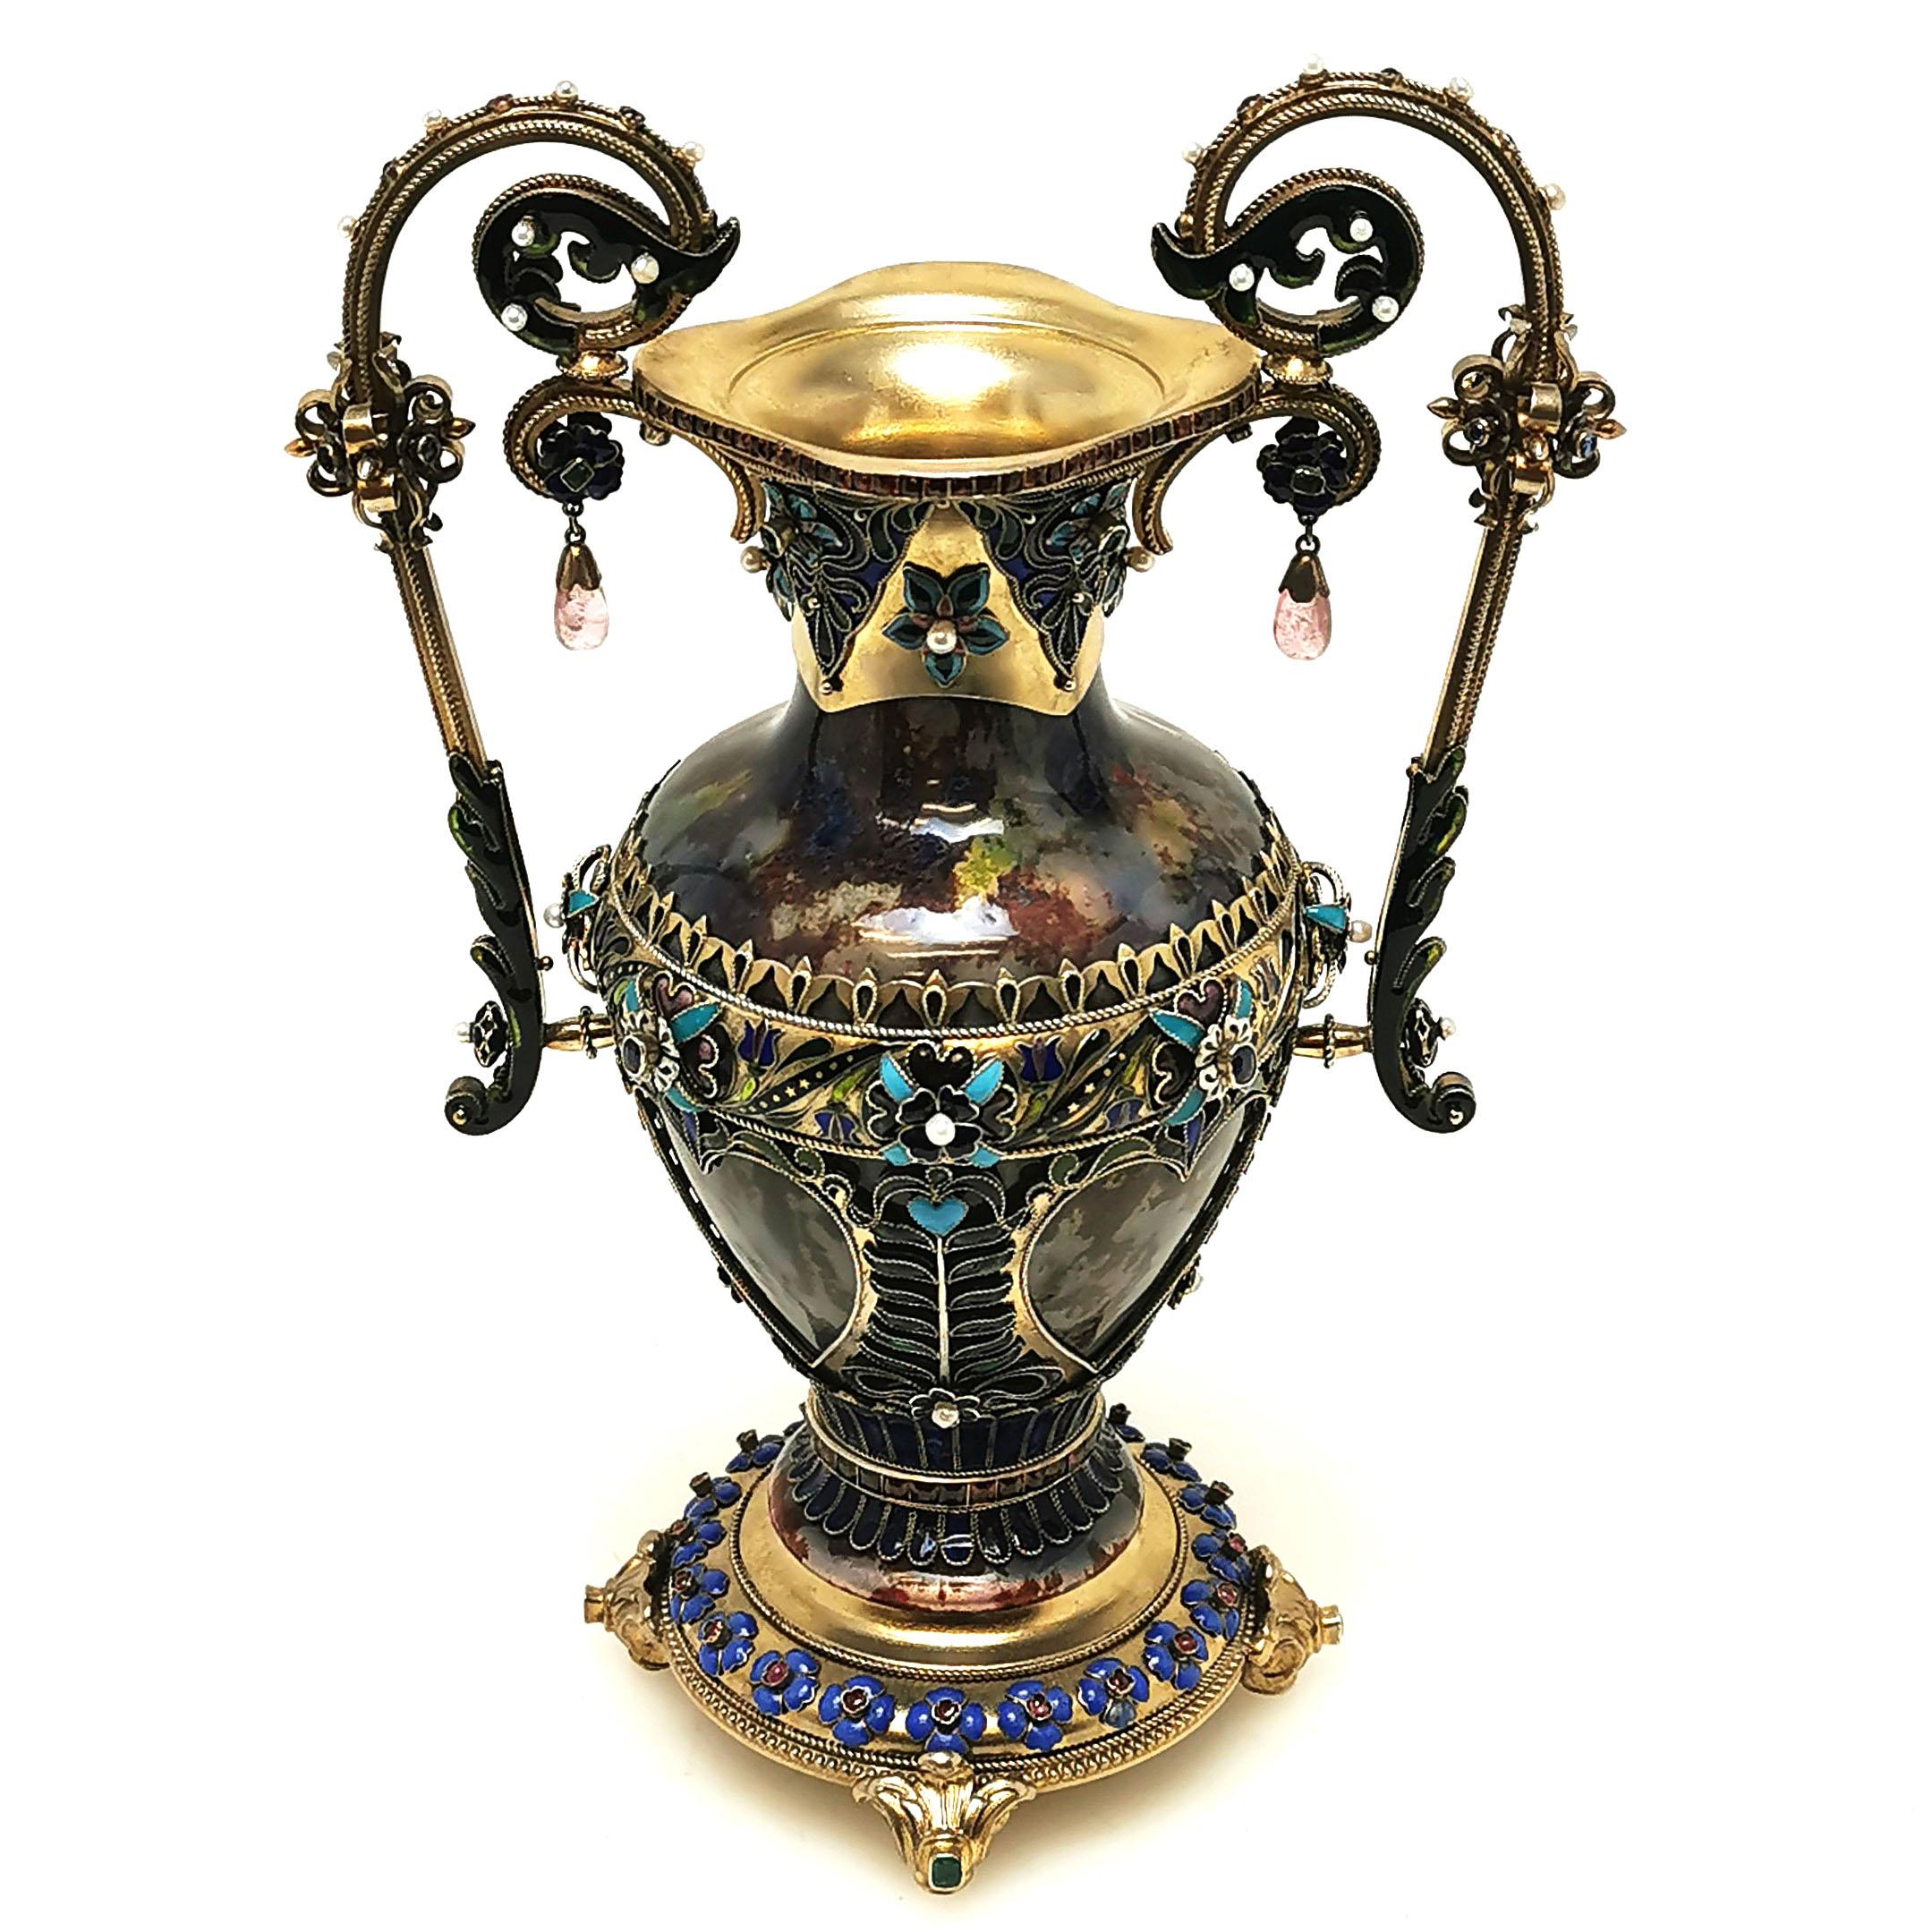 A spectacular Antique Austrian silver gilt and enamel vase ornamented with a variety of polished gems. The body of the Vase is embellished with Bohemian style enamelled patterning while the scrolls and borders of the Vase are further decorated with